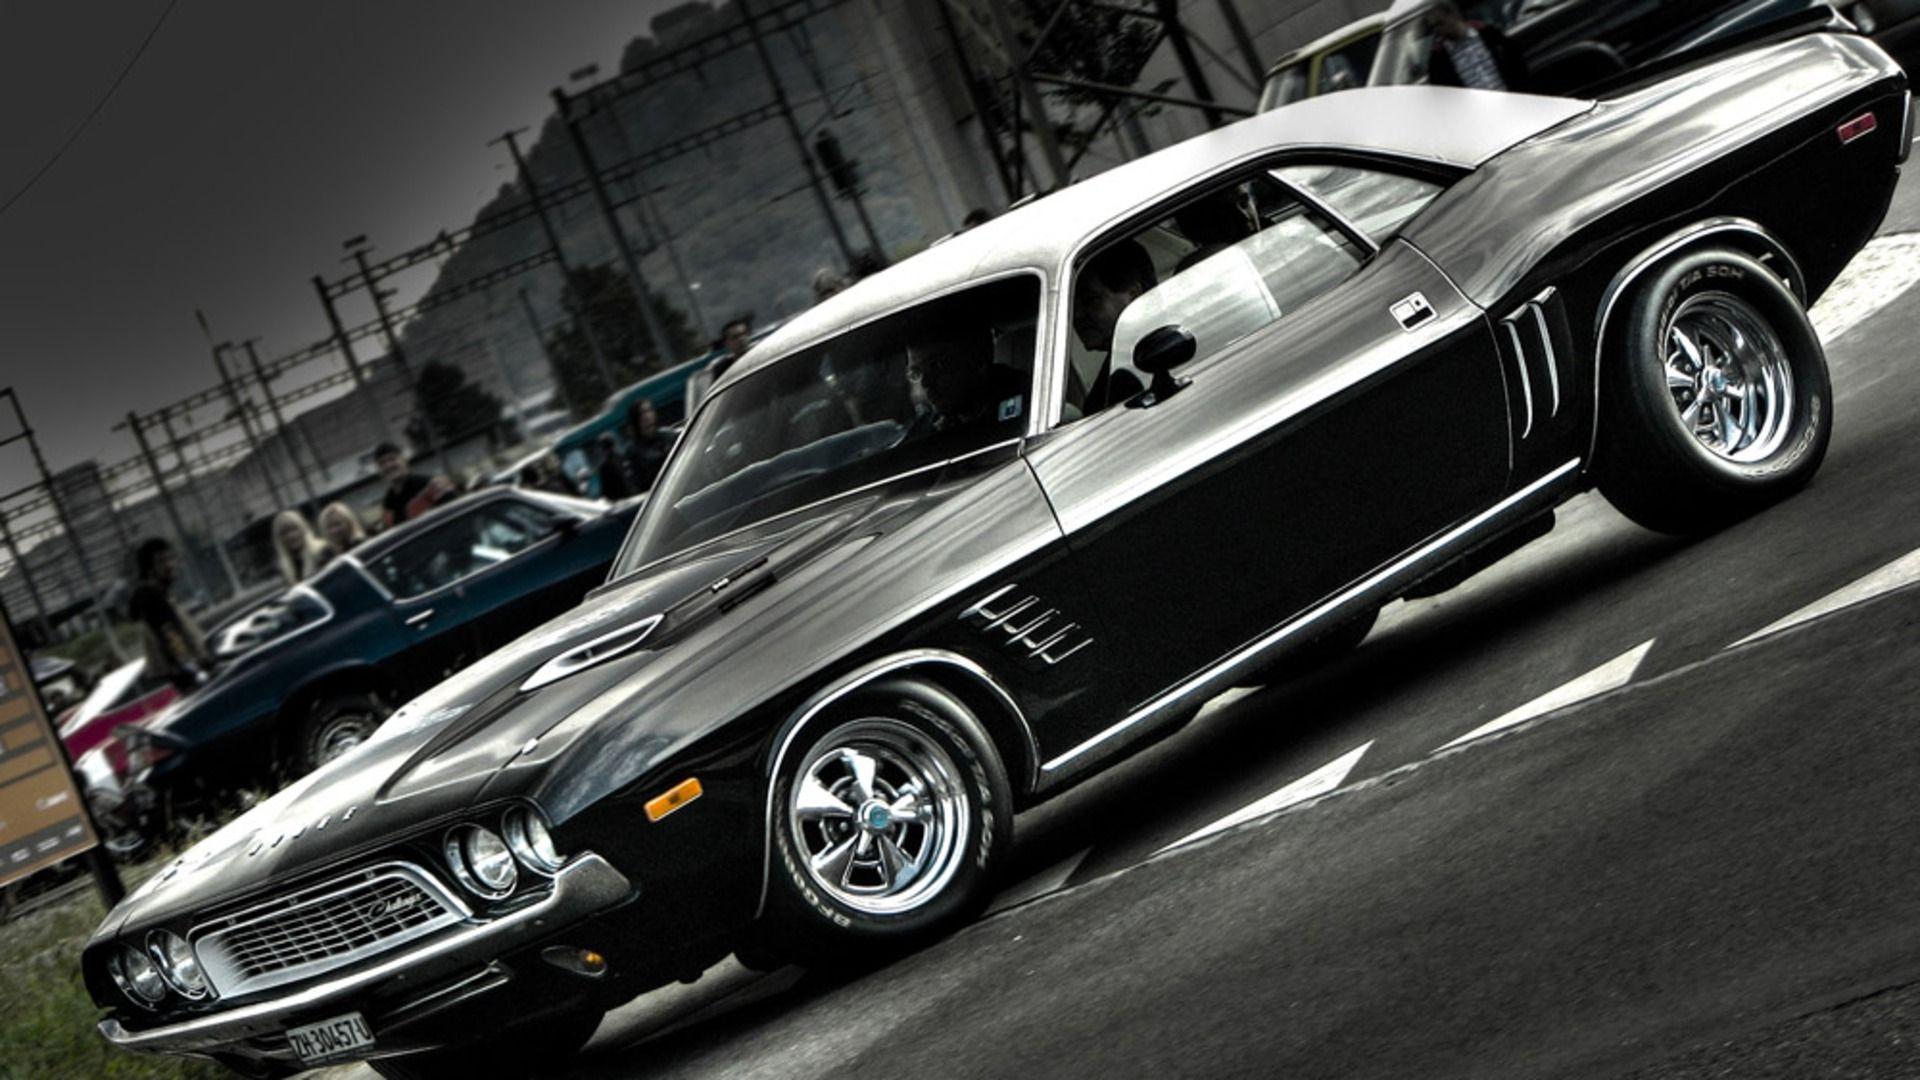 American Muscle Cars Wallpapers - Top Free American Muscle ...